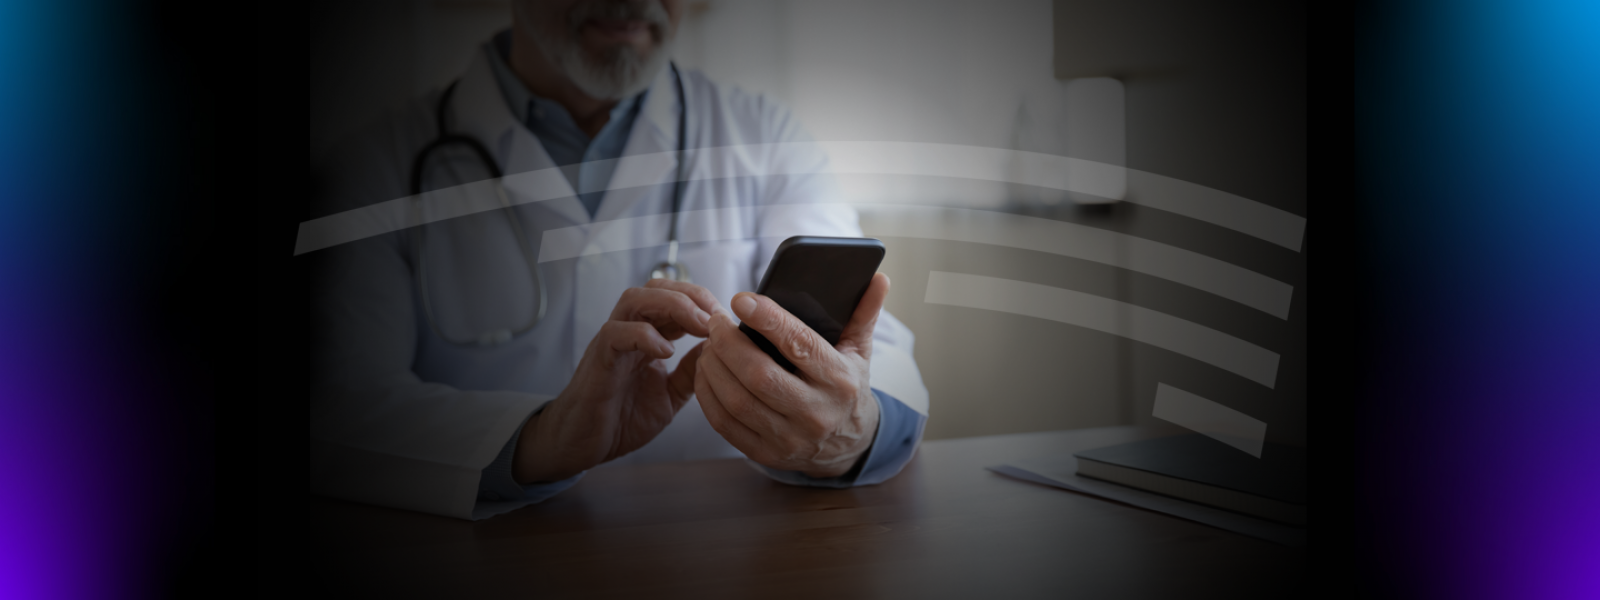 Senior professional male doctor holding mobile phone modern technology apps sitting at desk. Older physician using smartphone gadget tech for telemedicine remote online services concept. Close up view